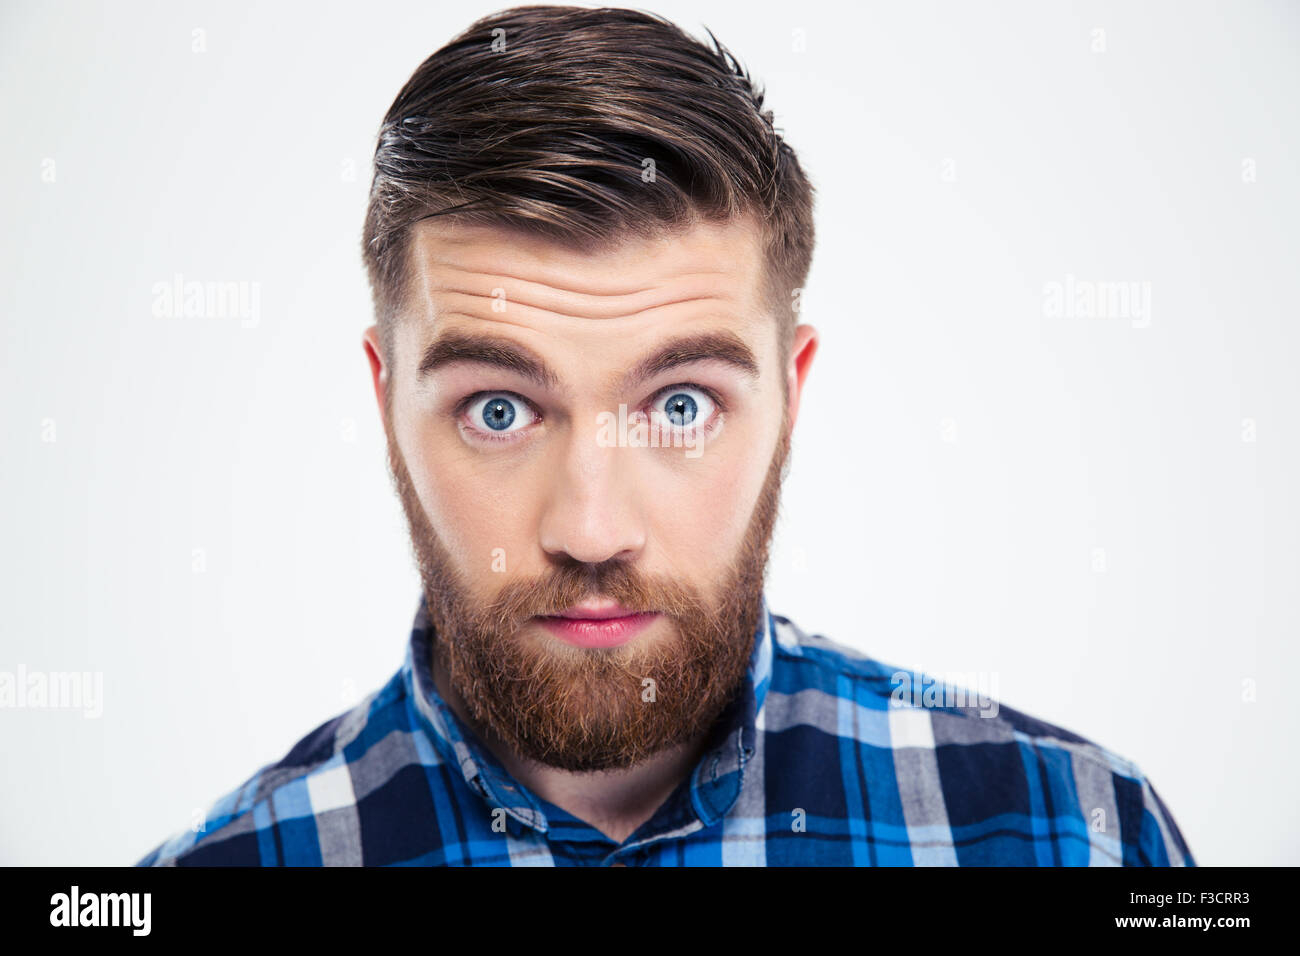 Portrait of a man with big eyes looking at camera isolated on a white background Stock Photo